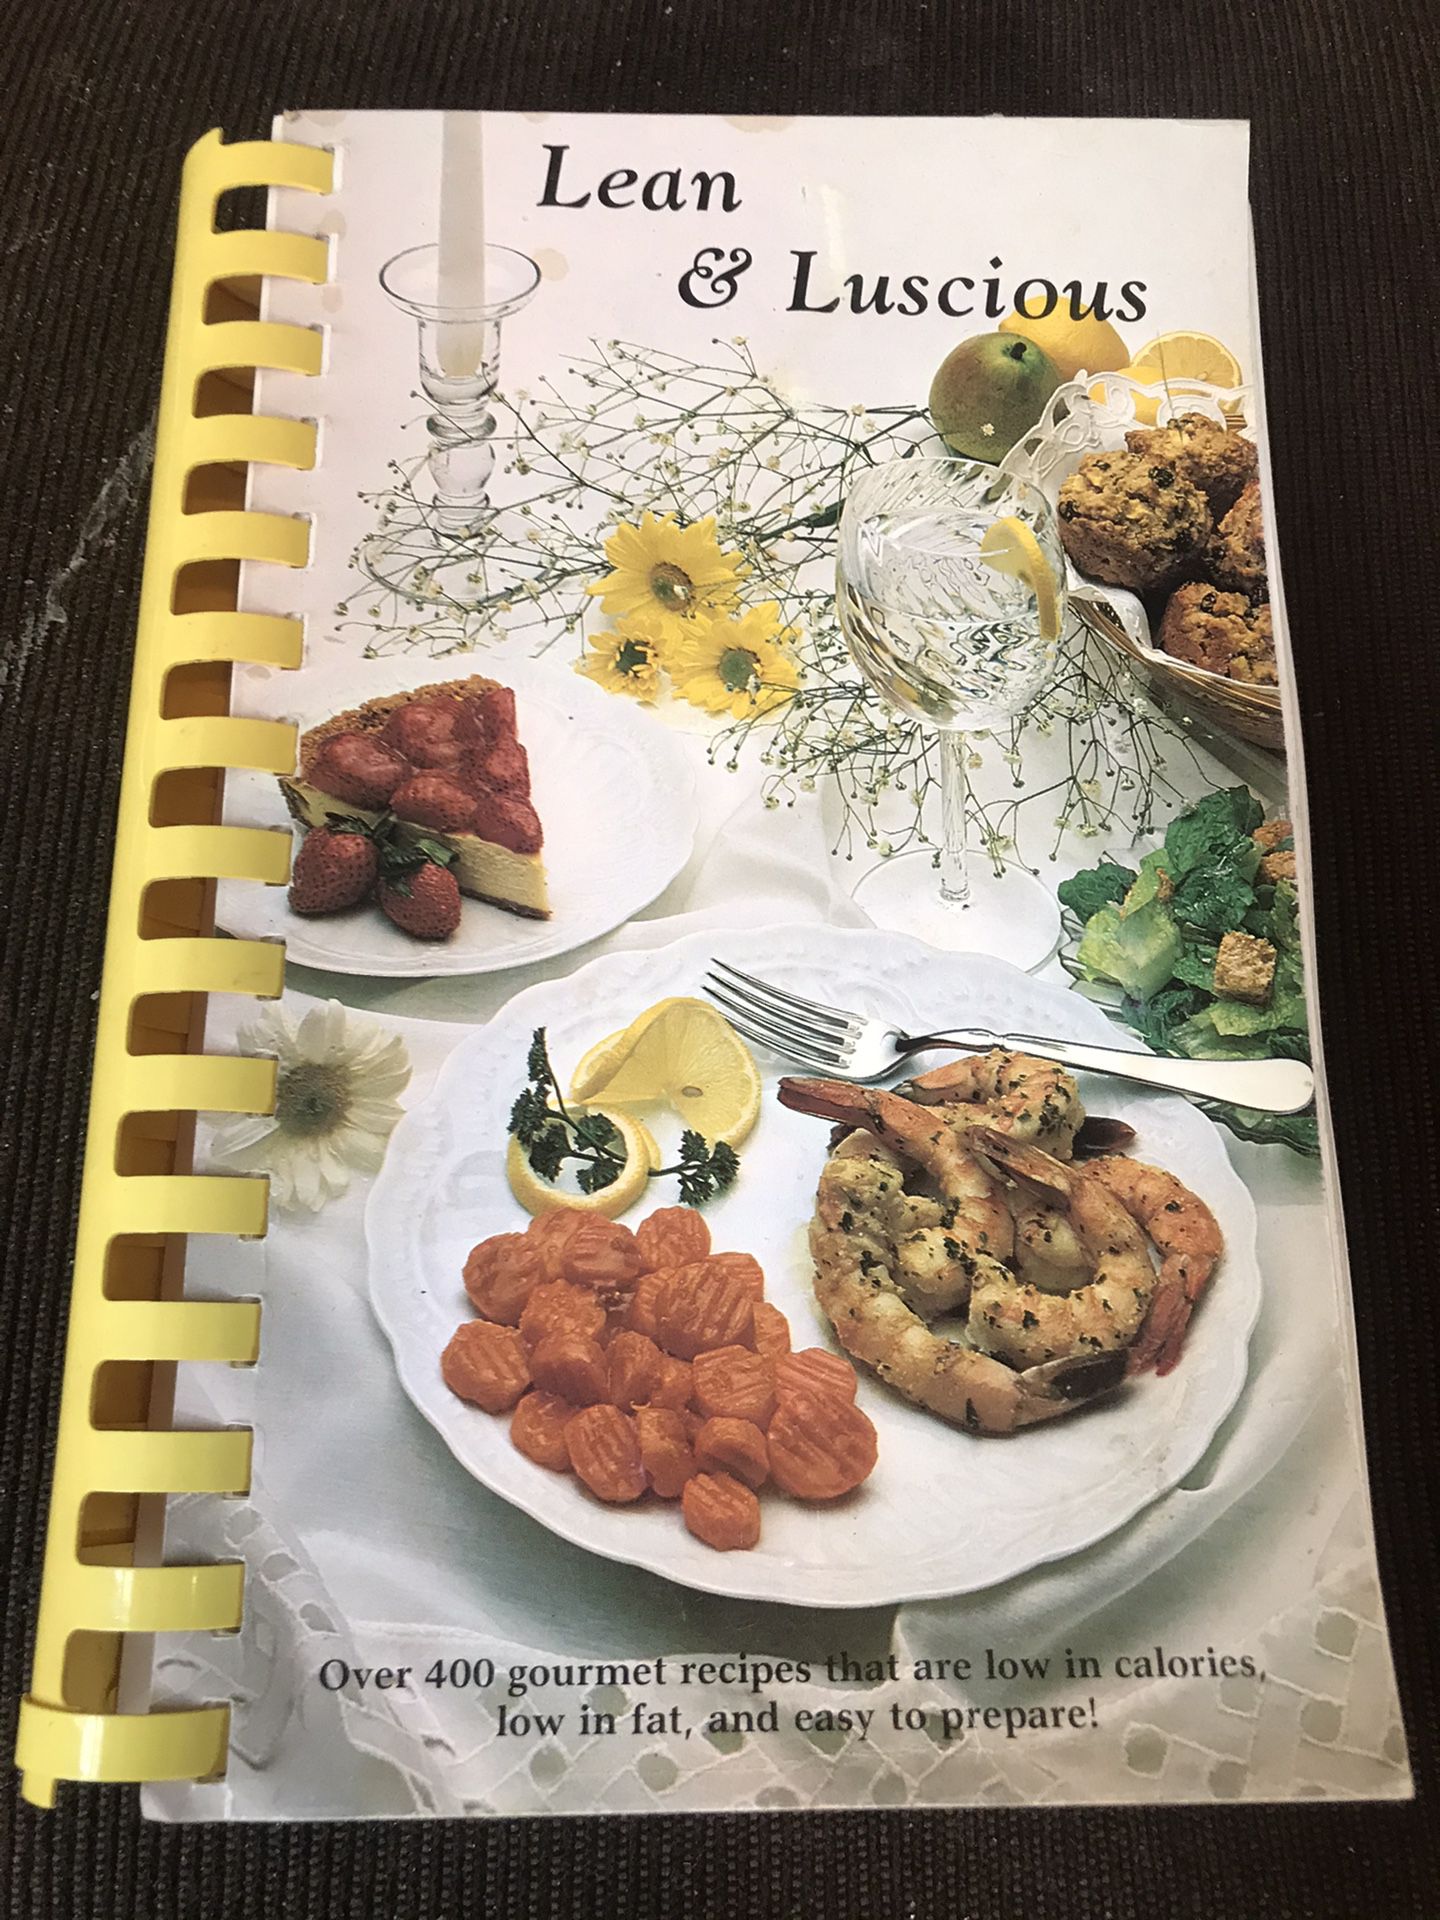 Lean and luscious cookbook! 400 recipes that are low in calorie low in fat & easy to prepare!